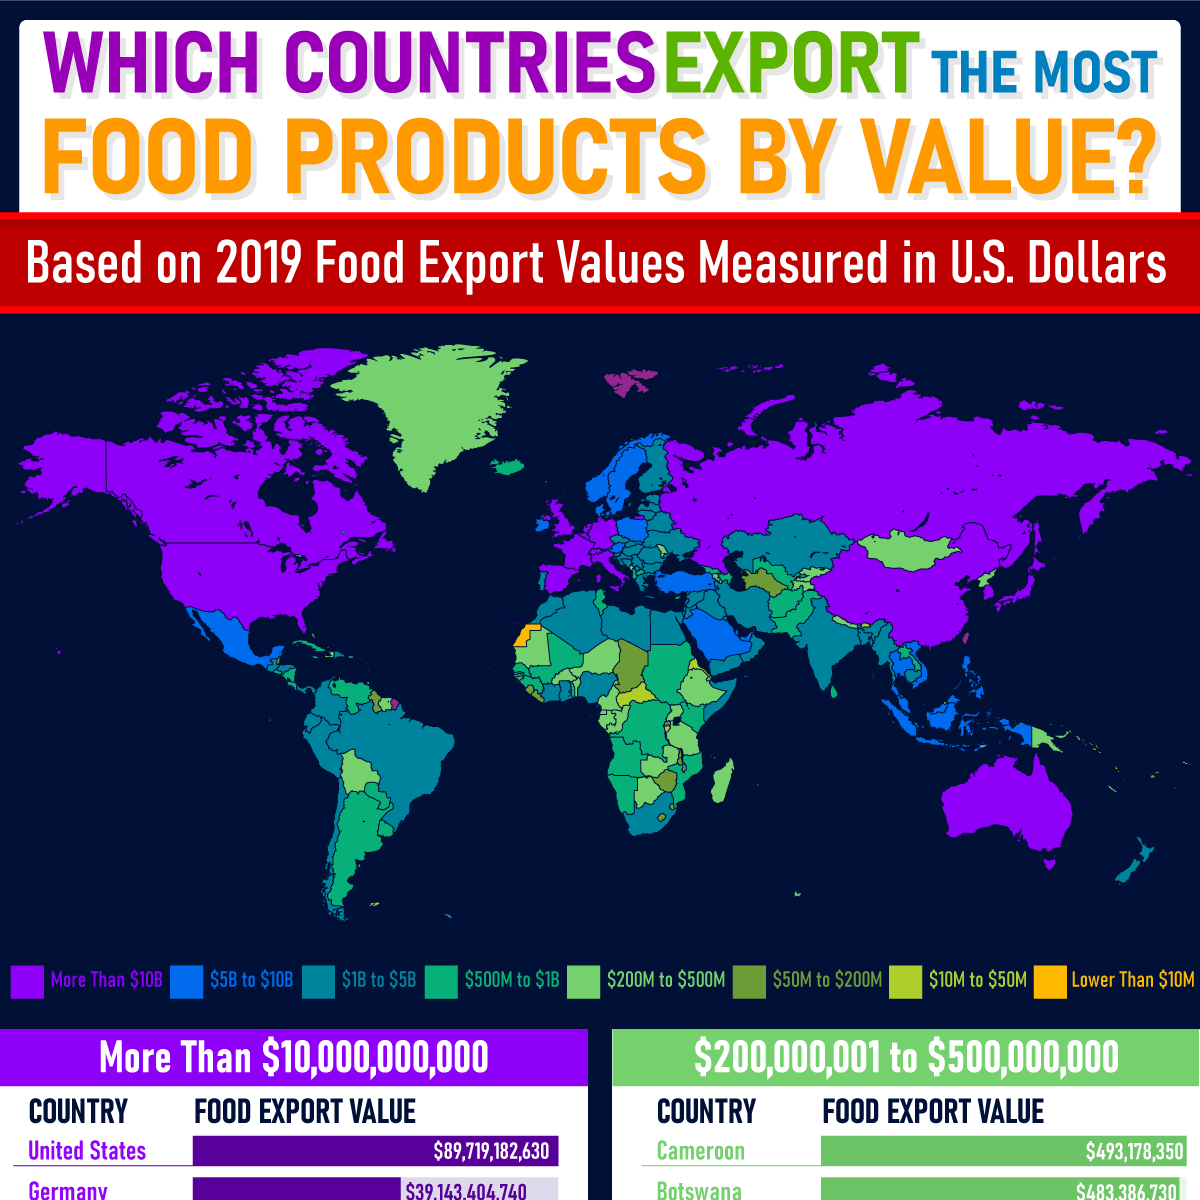 Which Countries Export the Most Food Products by Value?